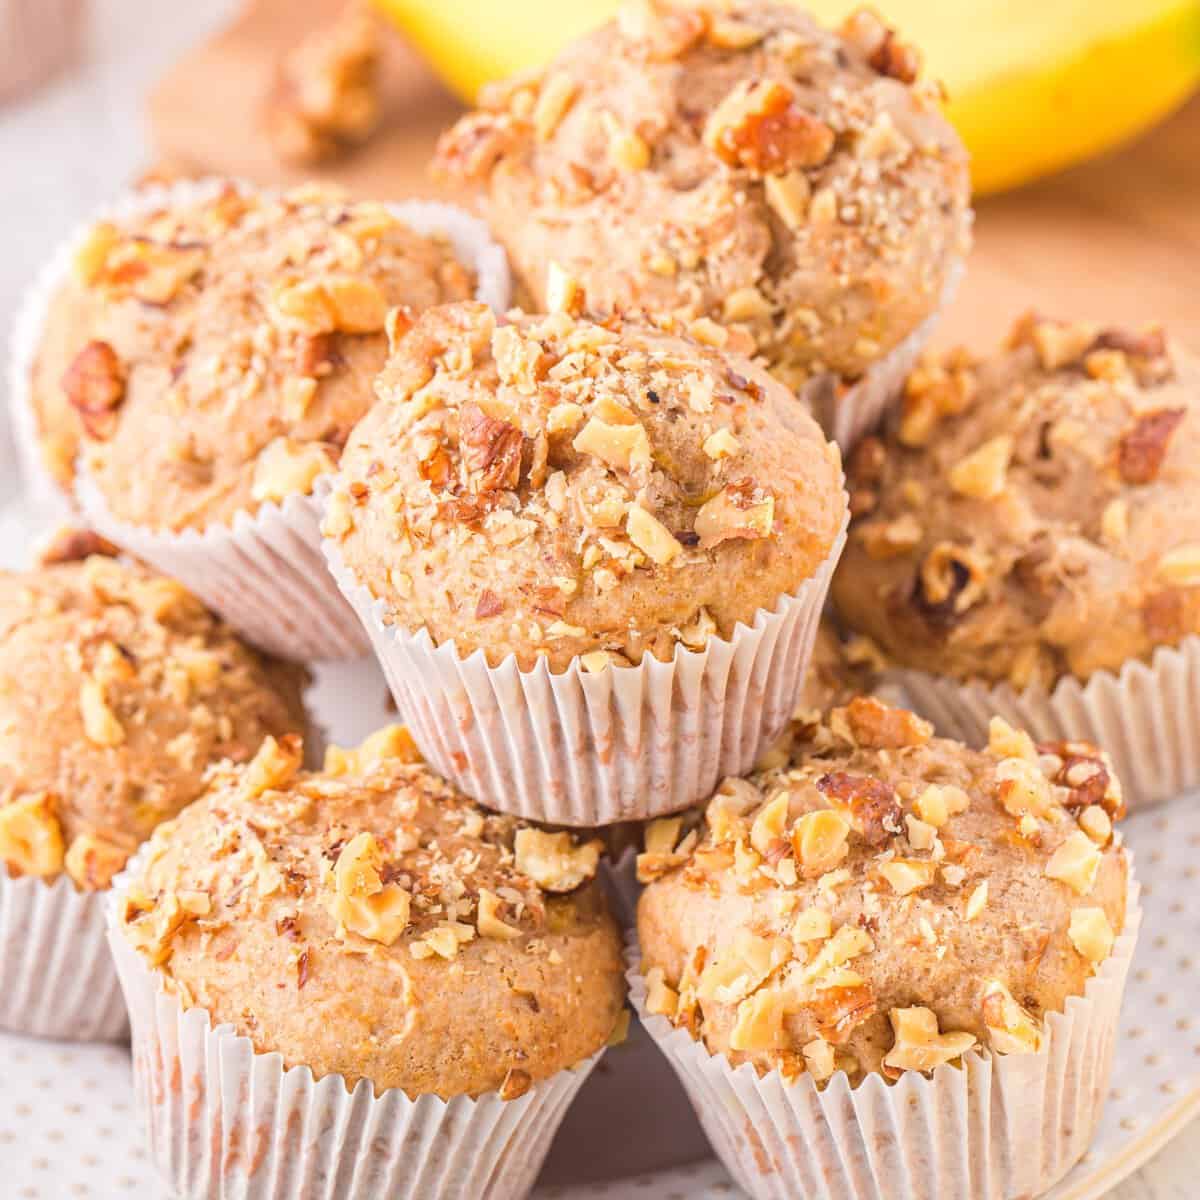 Banana Nut Muffins (made with cake mix)